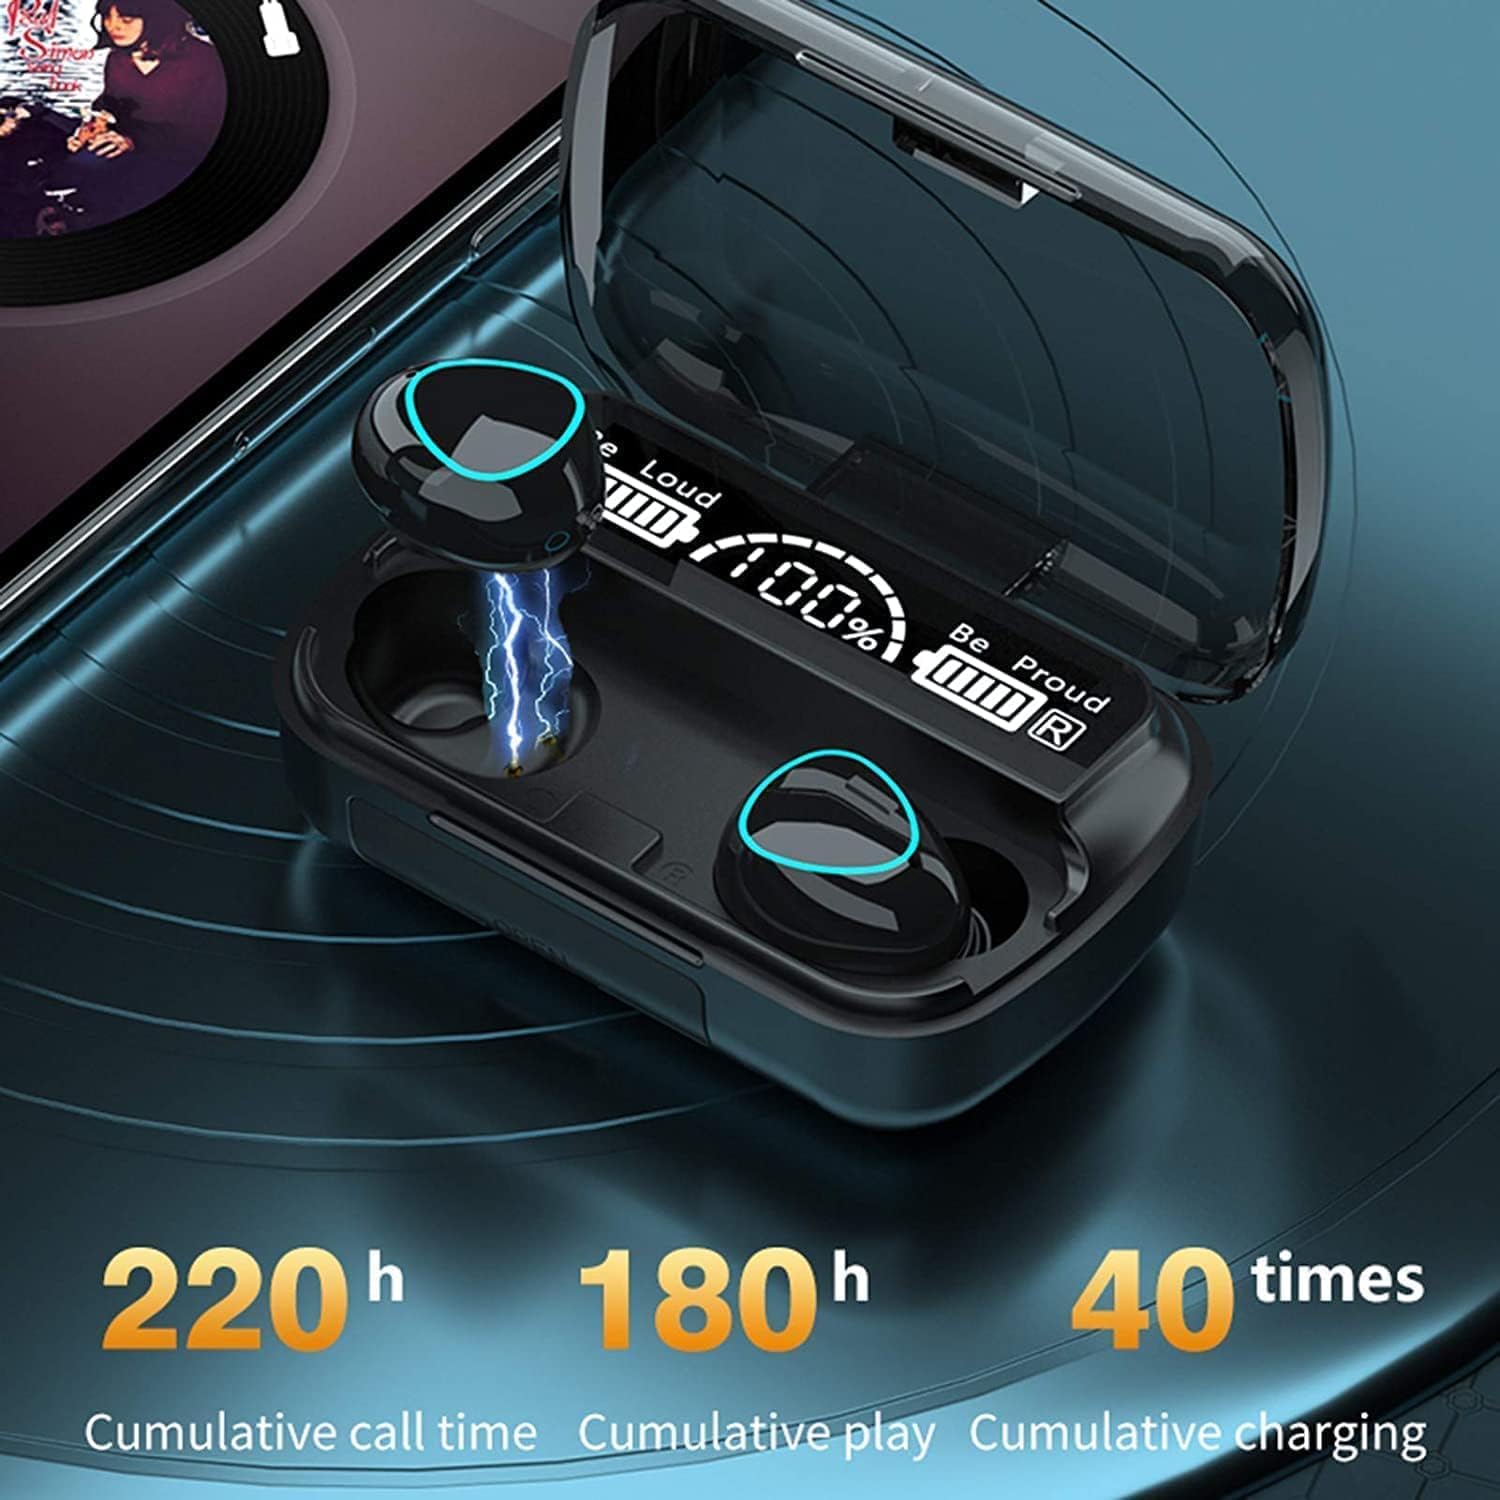 NIUTA Bluetooth Headphones Wireless Earbuds, 142Hr Playtime Sports Ear Buds with 2000mAh Digital Display Charging Case, IPX7 Waterproof Headset with Microphone Cordless Earphone for iPhone Andrio